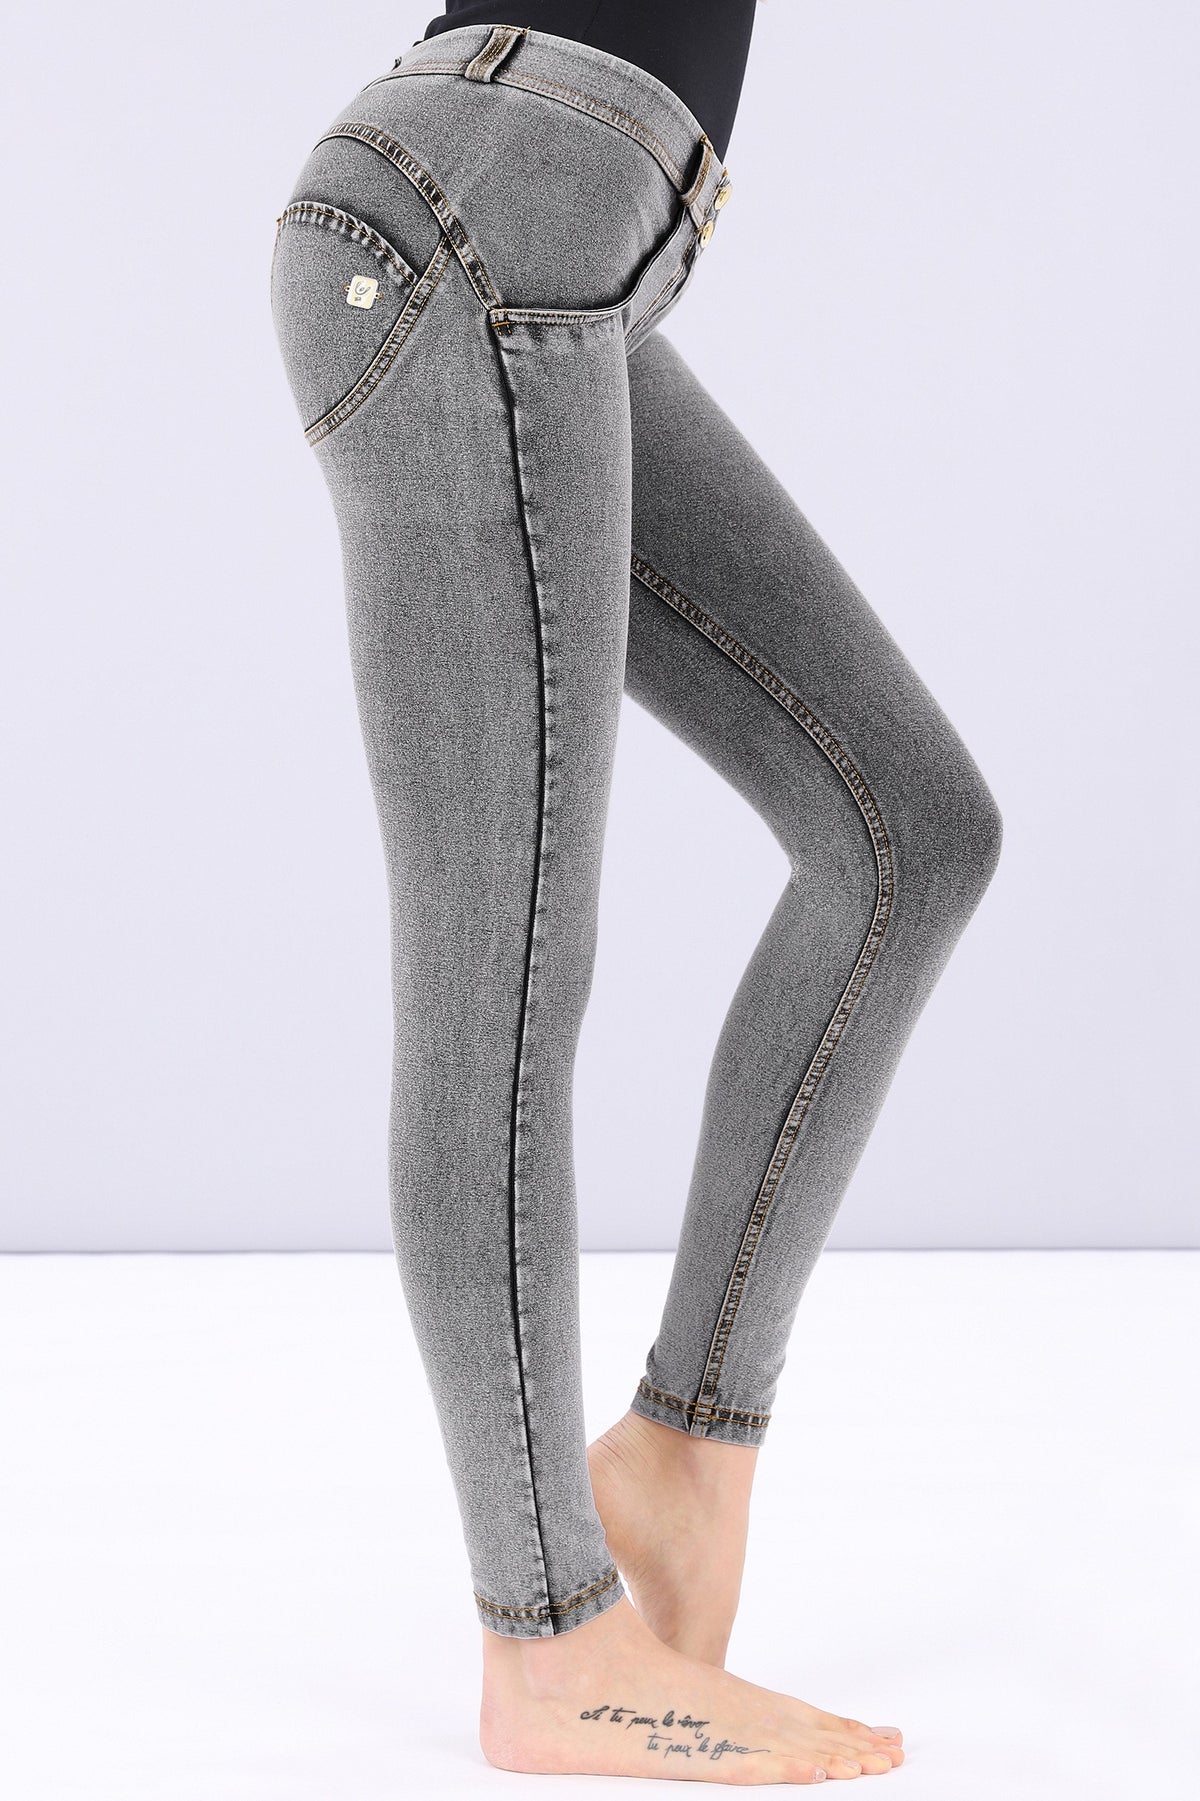 WASHED GREY DENIM MID-RISE 7/8 ANKLE